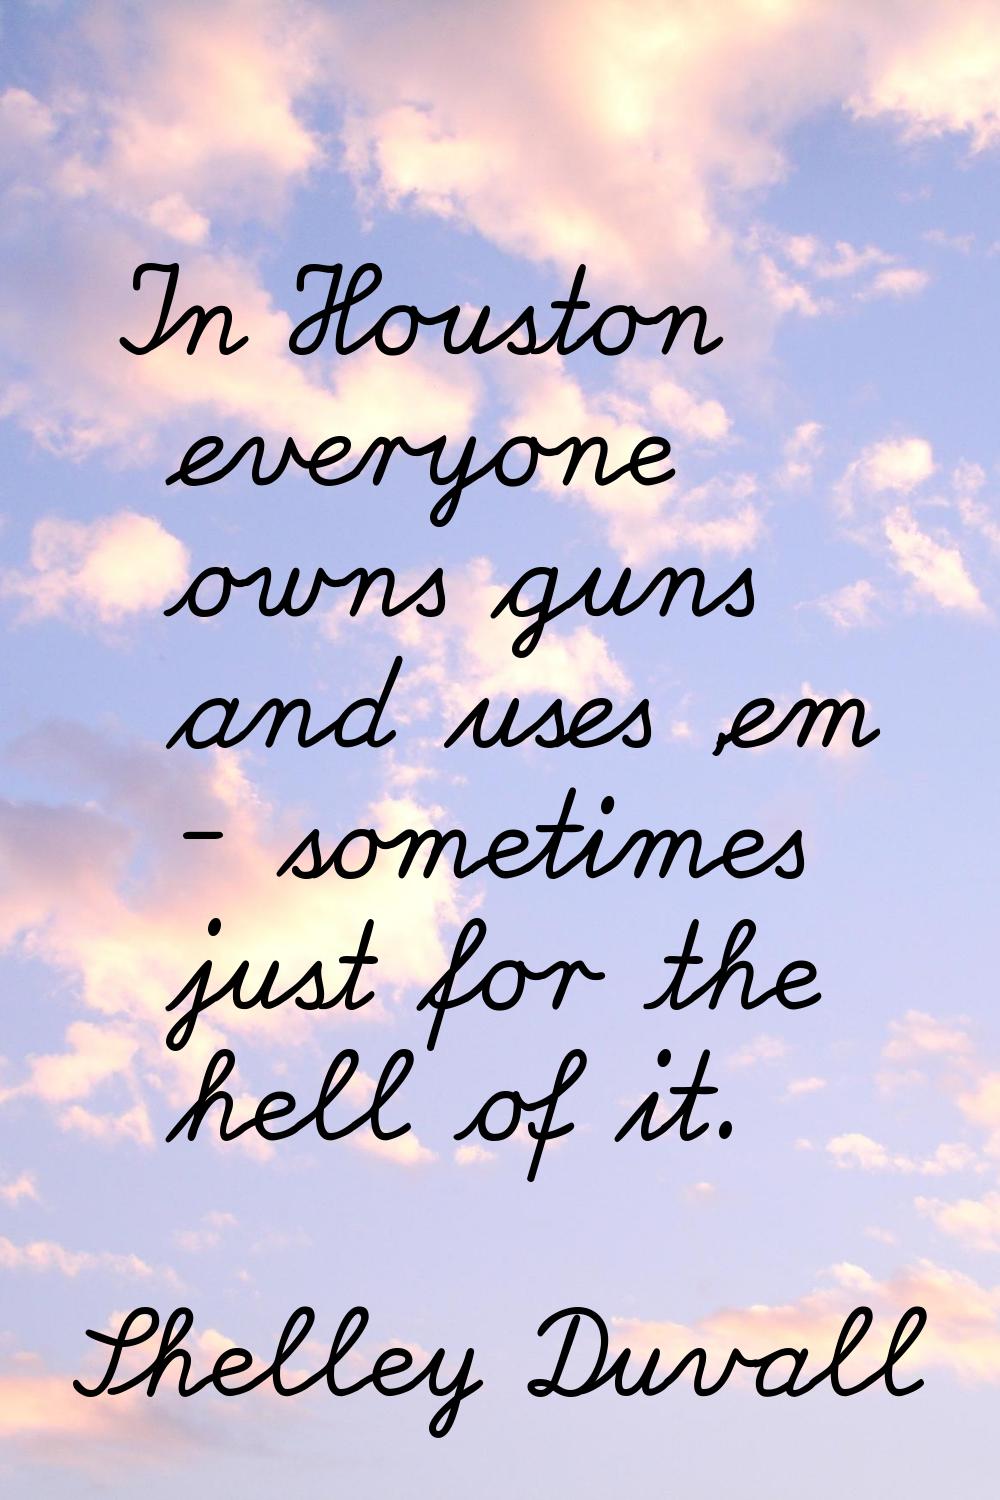 In Houston everyone owns guns and uses 'em - sometimes just for the hell of it.